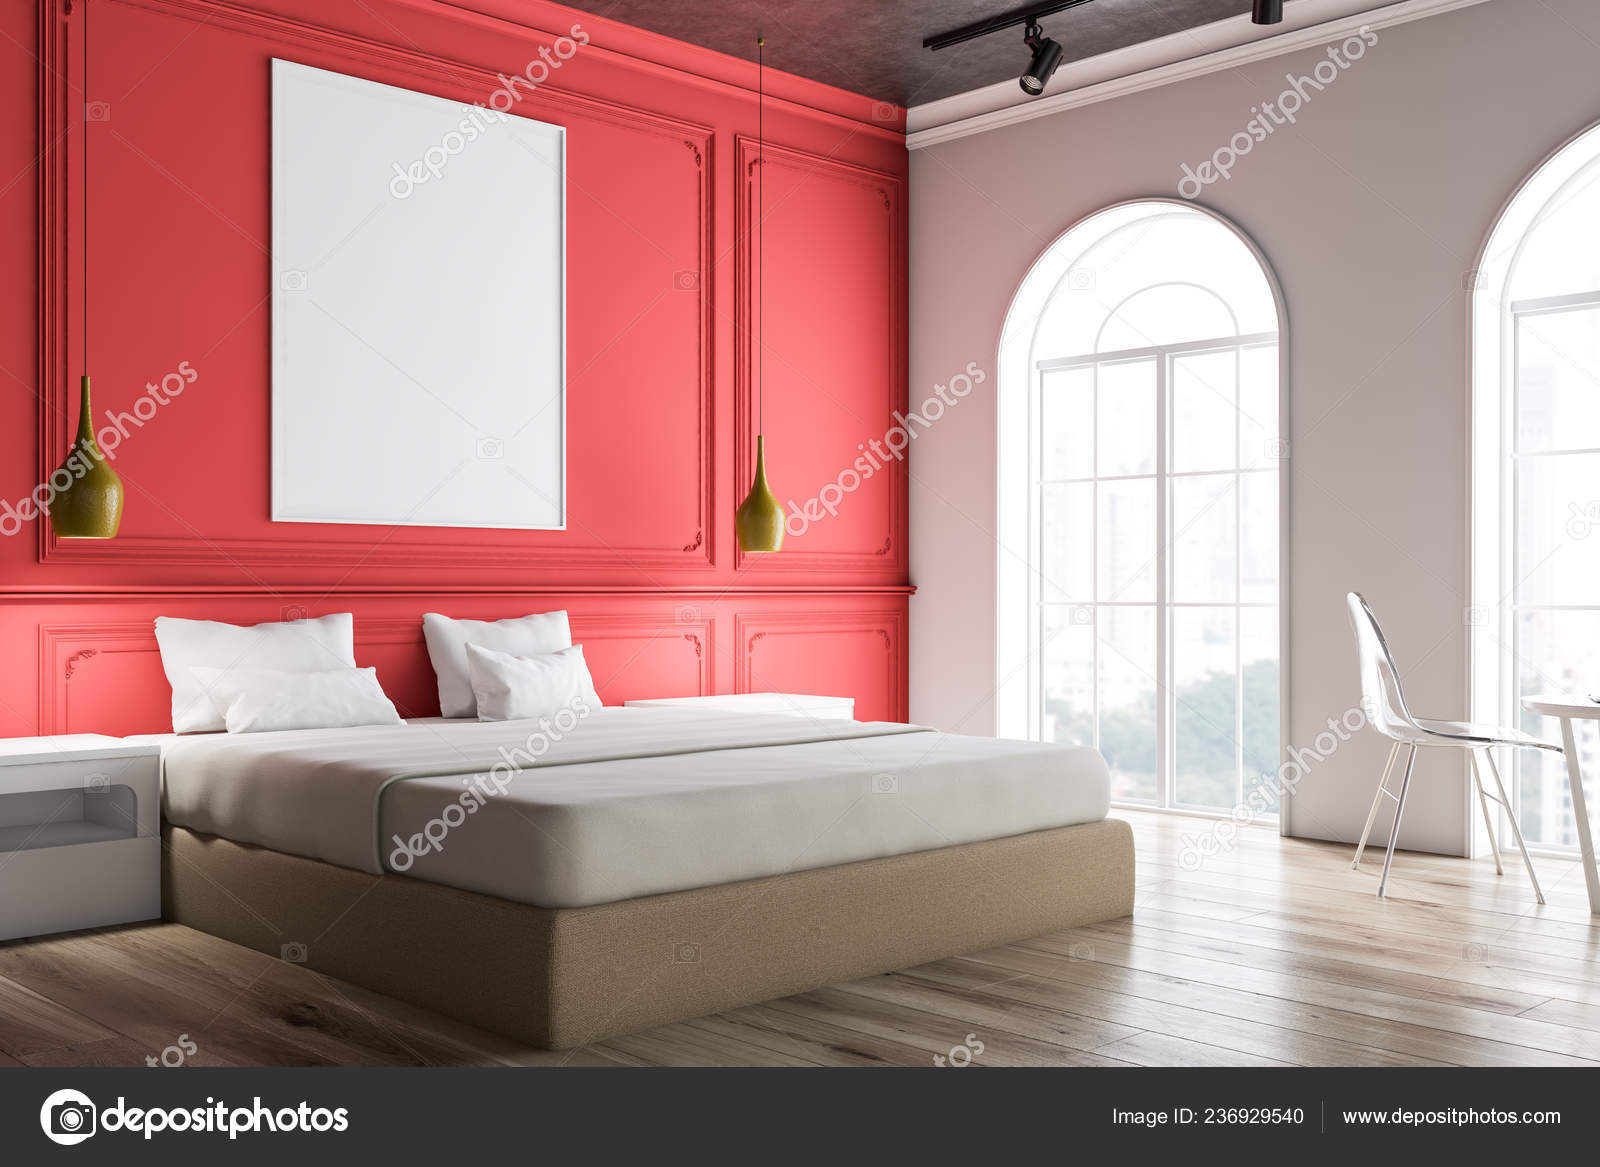 Red And White Bedrooms Designs Corner Master Bedroom Red